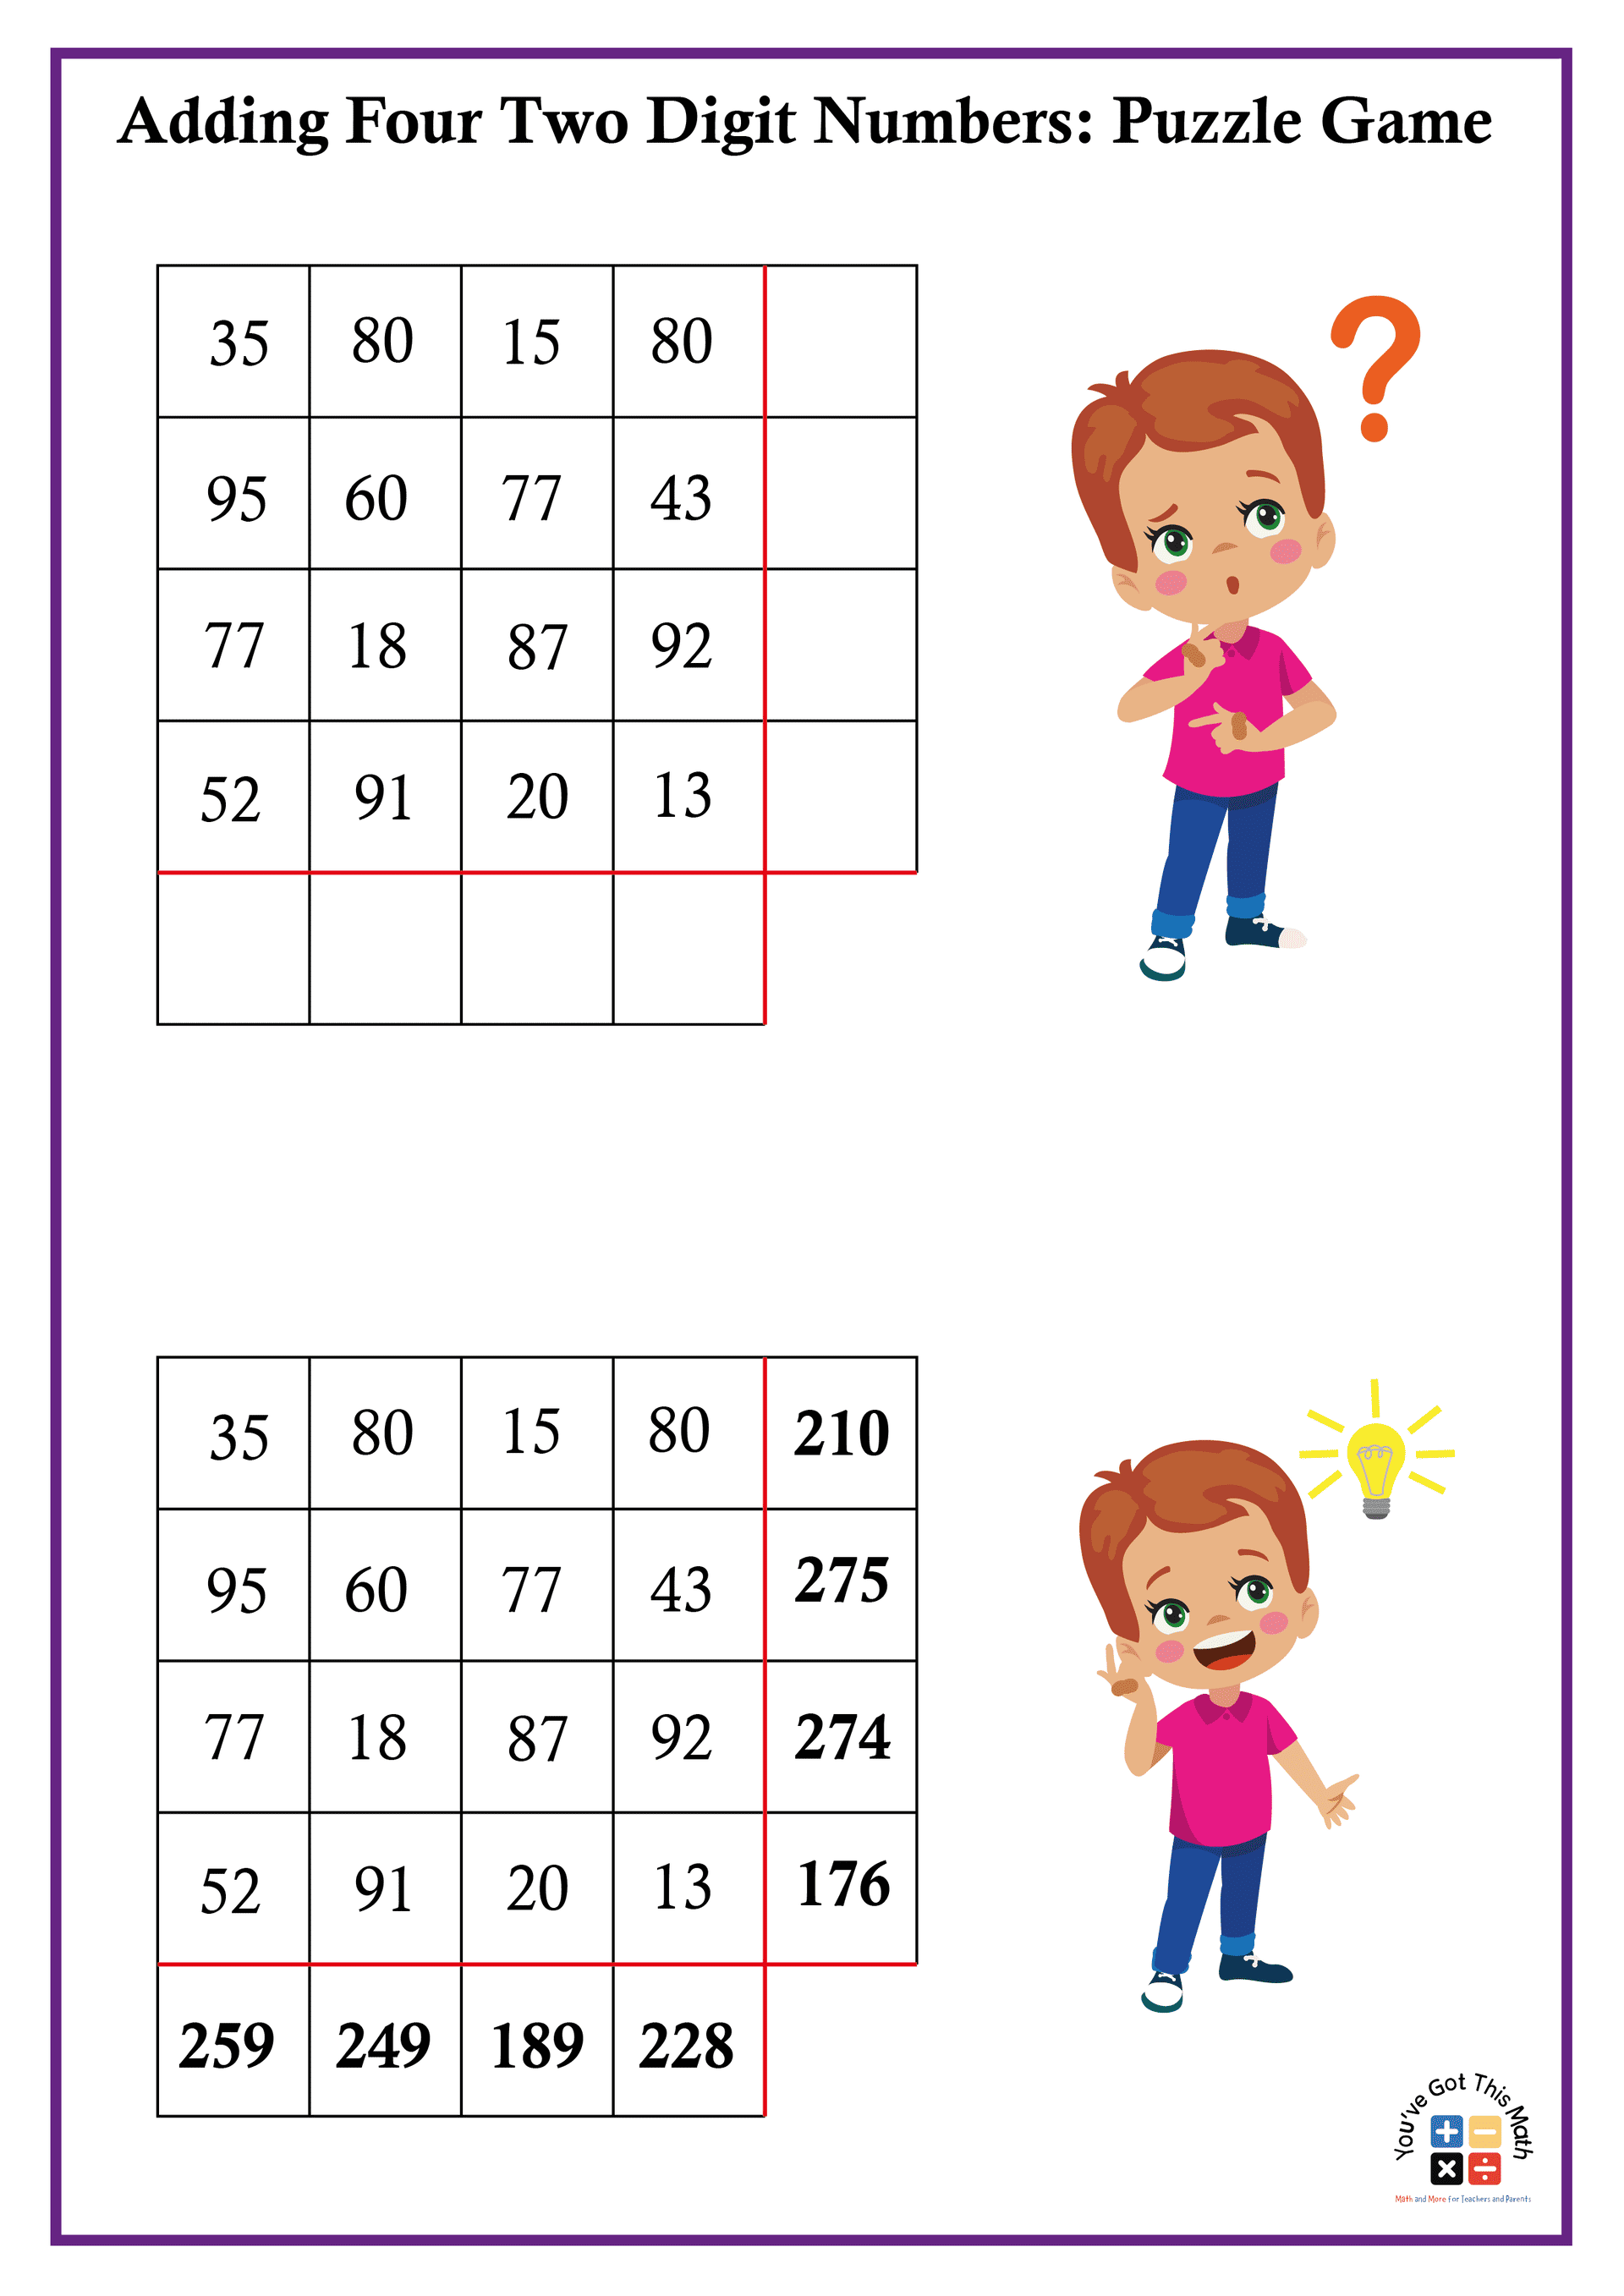 1- Adding four two digit numbers: puzzle game